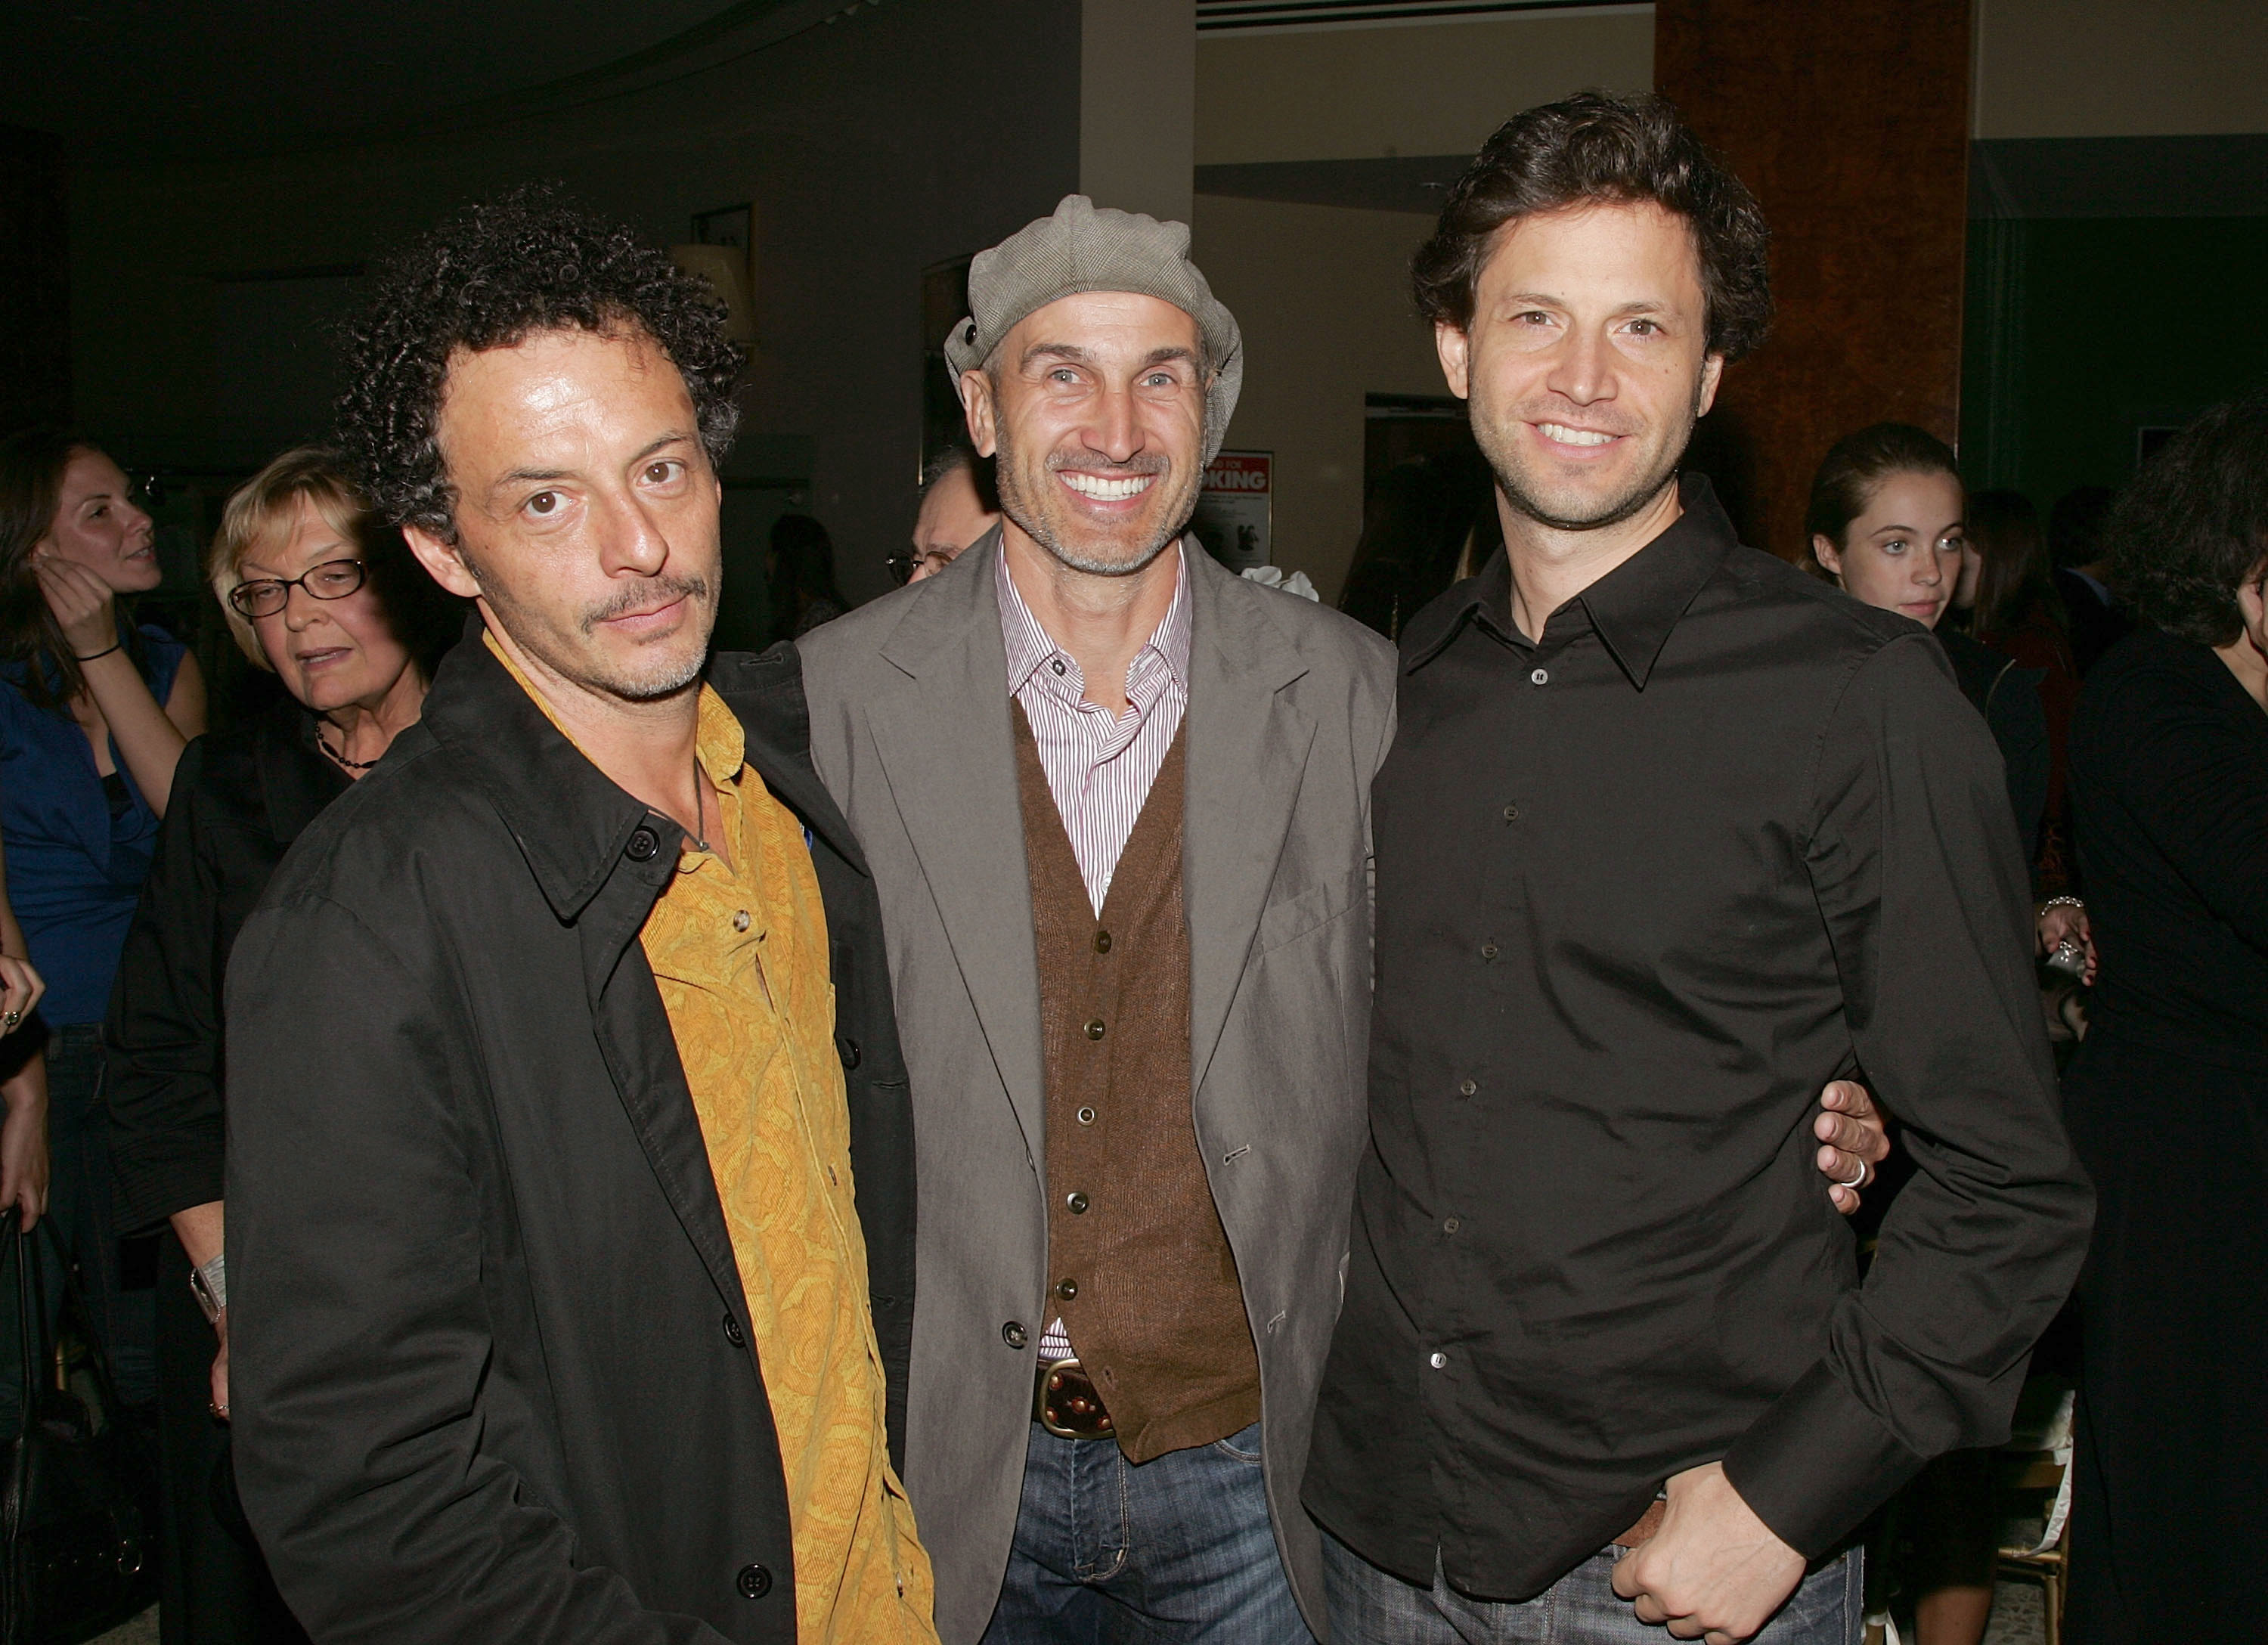 (L) Adam Kimmel,Craig Gillespie and Bennett Miller attend the "Lars and the Real Girl" premiere after party at The Brasserie 8 1/2 on October 3, 2007 in New York City. | Source: Getty Images